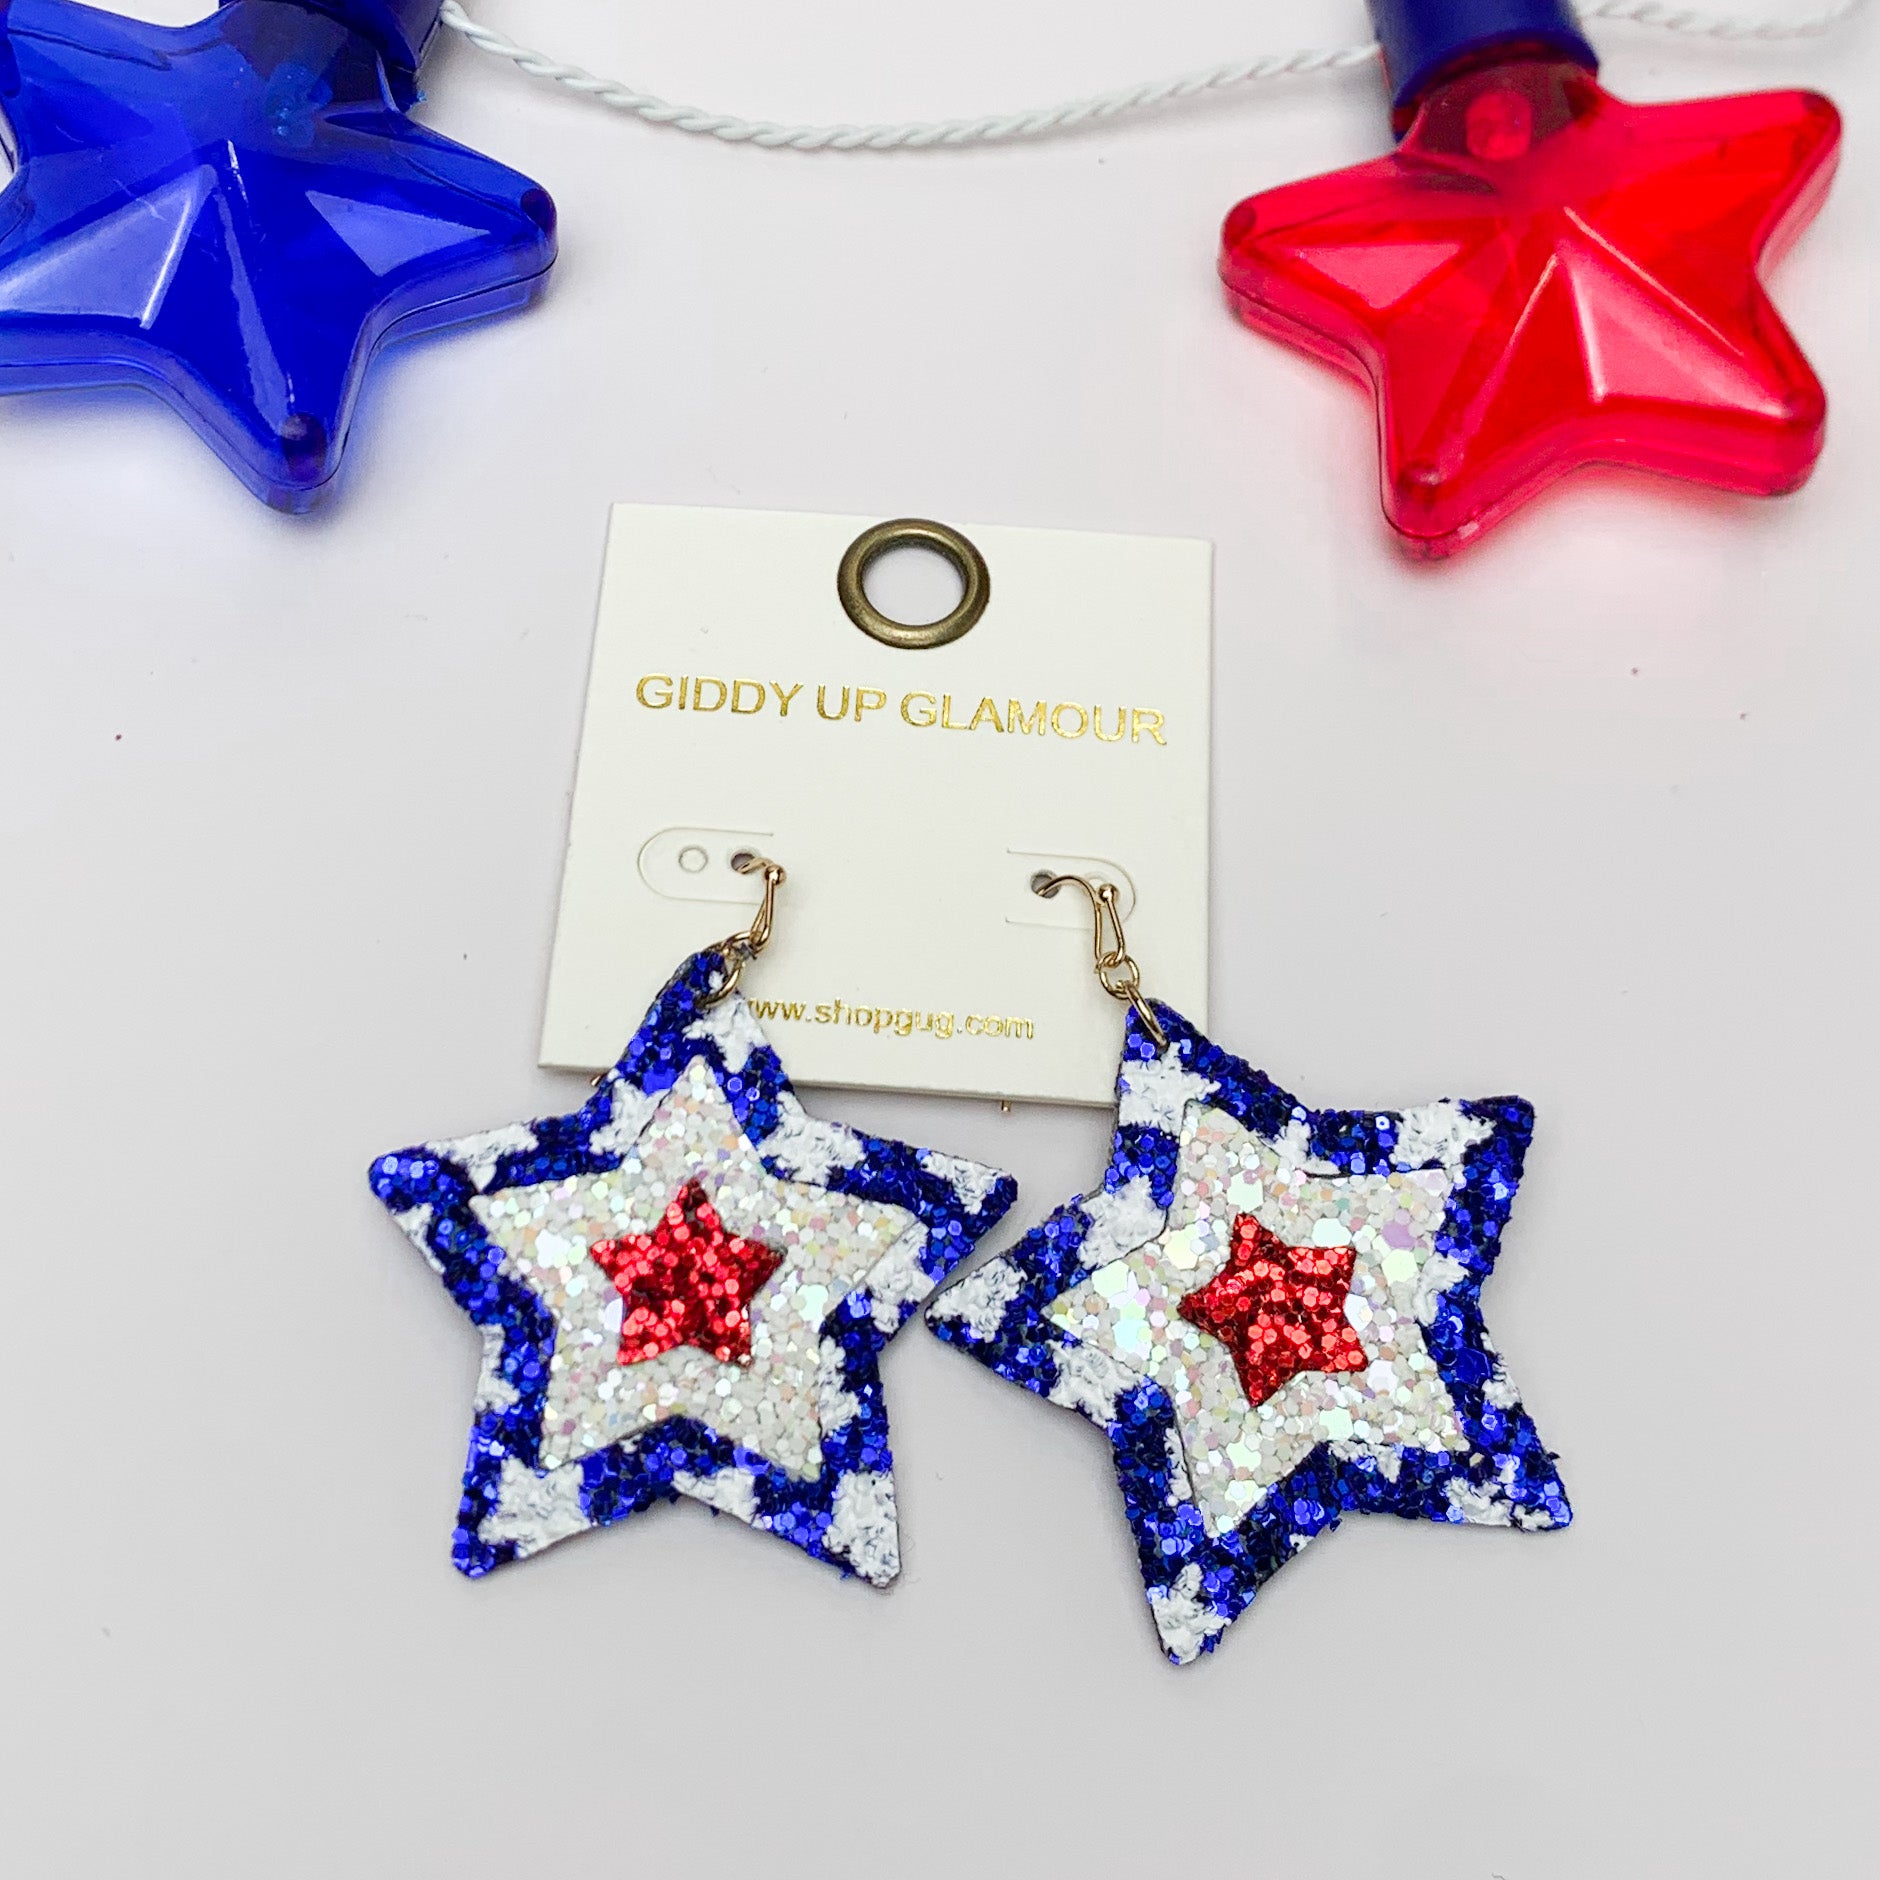 Patriotic Red, White, and Blue Star Earrings. Pictured on a white background with a blue and red star above the earrings for decoration. 